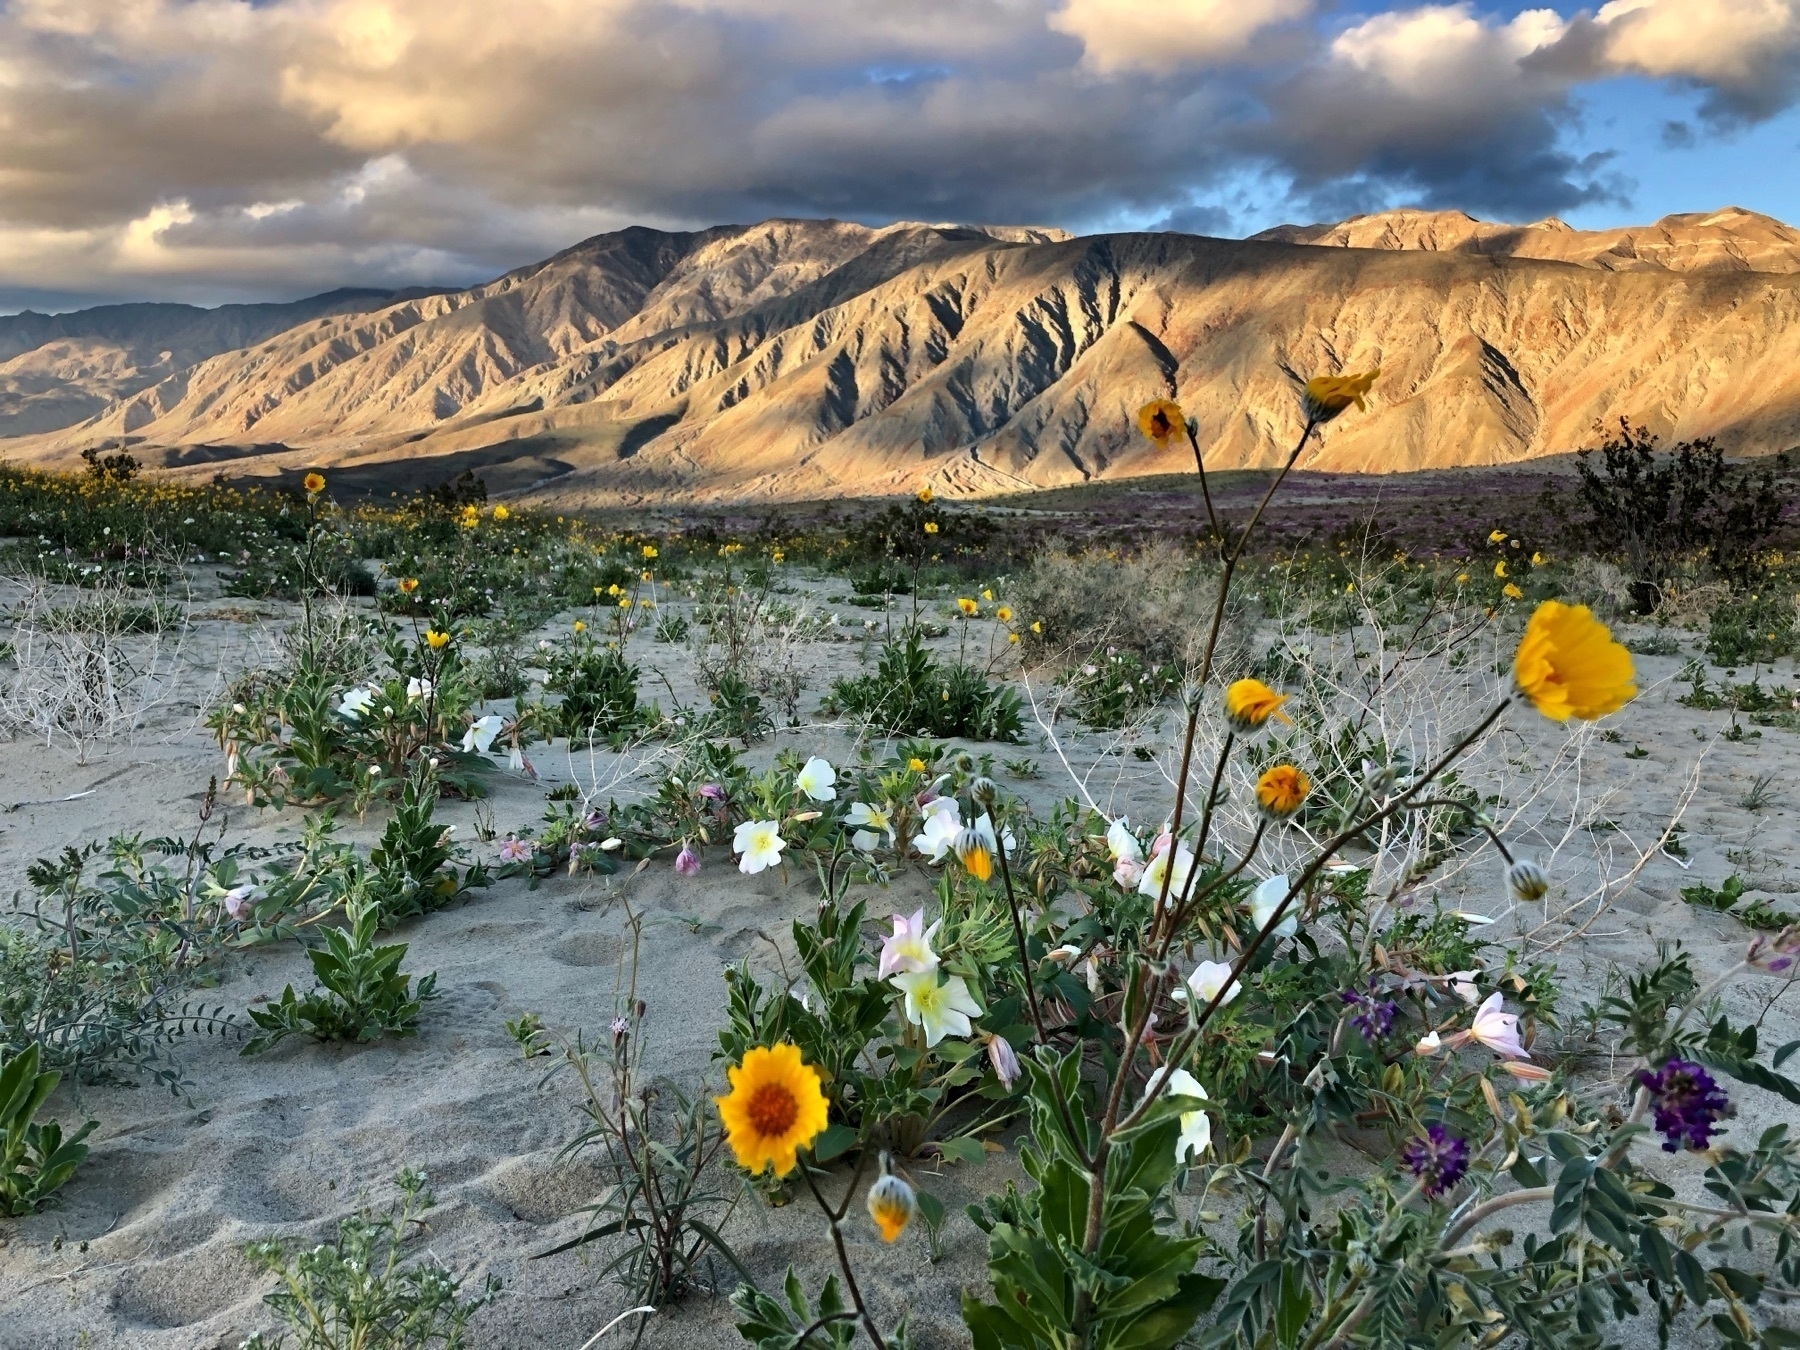 Wildflowers in the foreground with a mountain ridge in the distance in Anza-Borrego Desert State Park